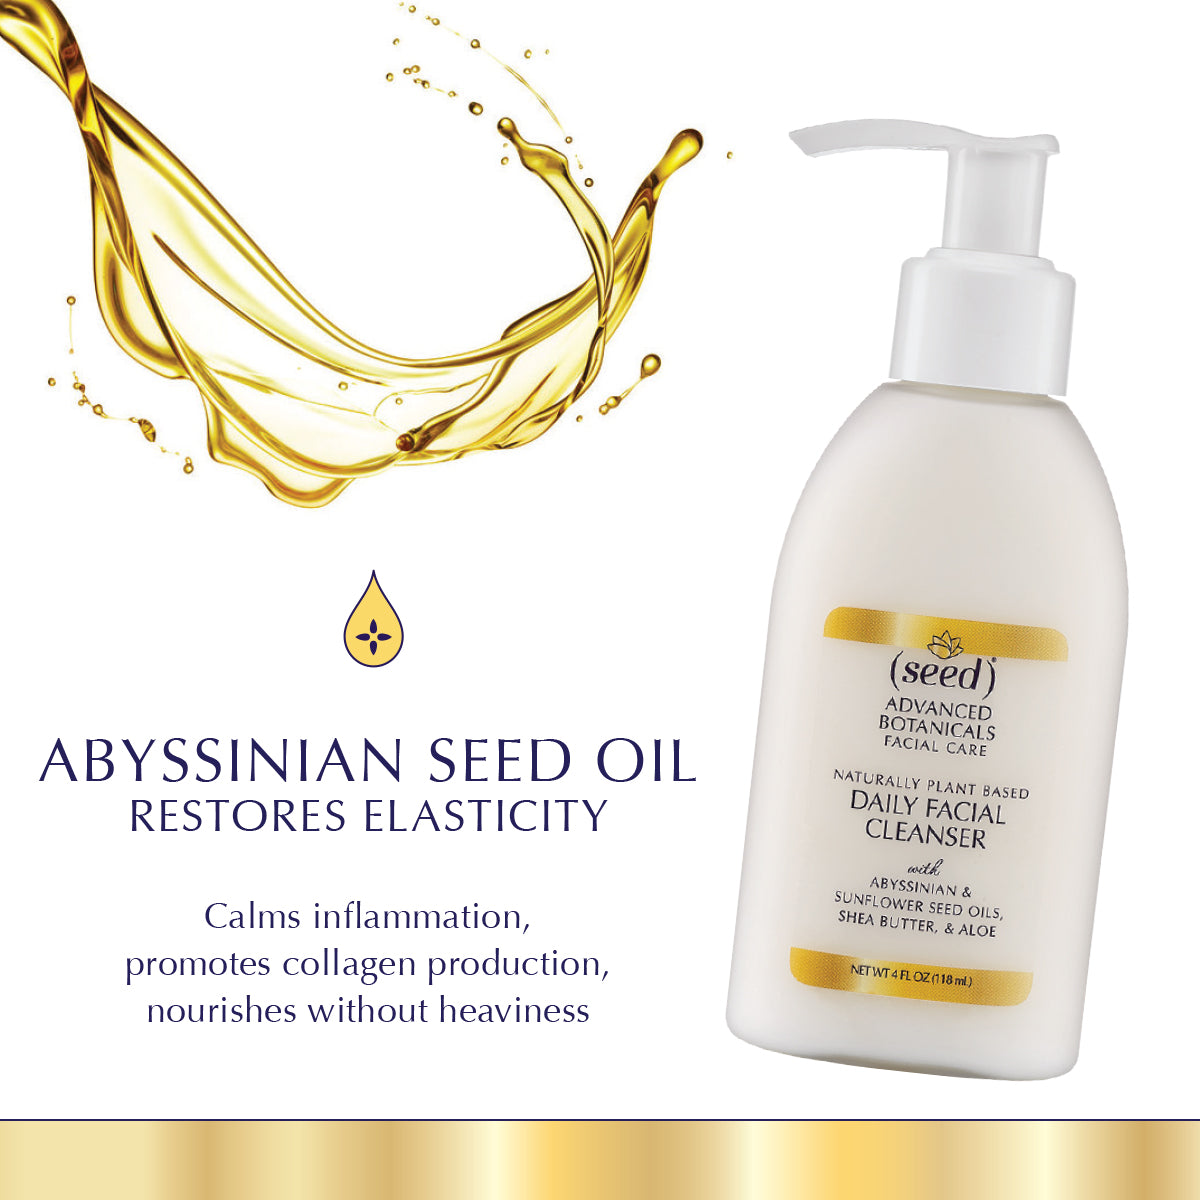 Seed Advanced Botanicals Facial Cleanser features Abyssinian Seed Oil